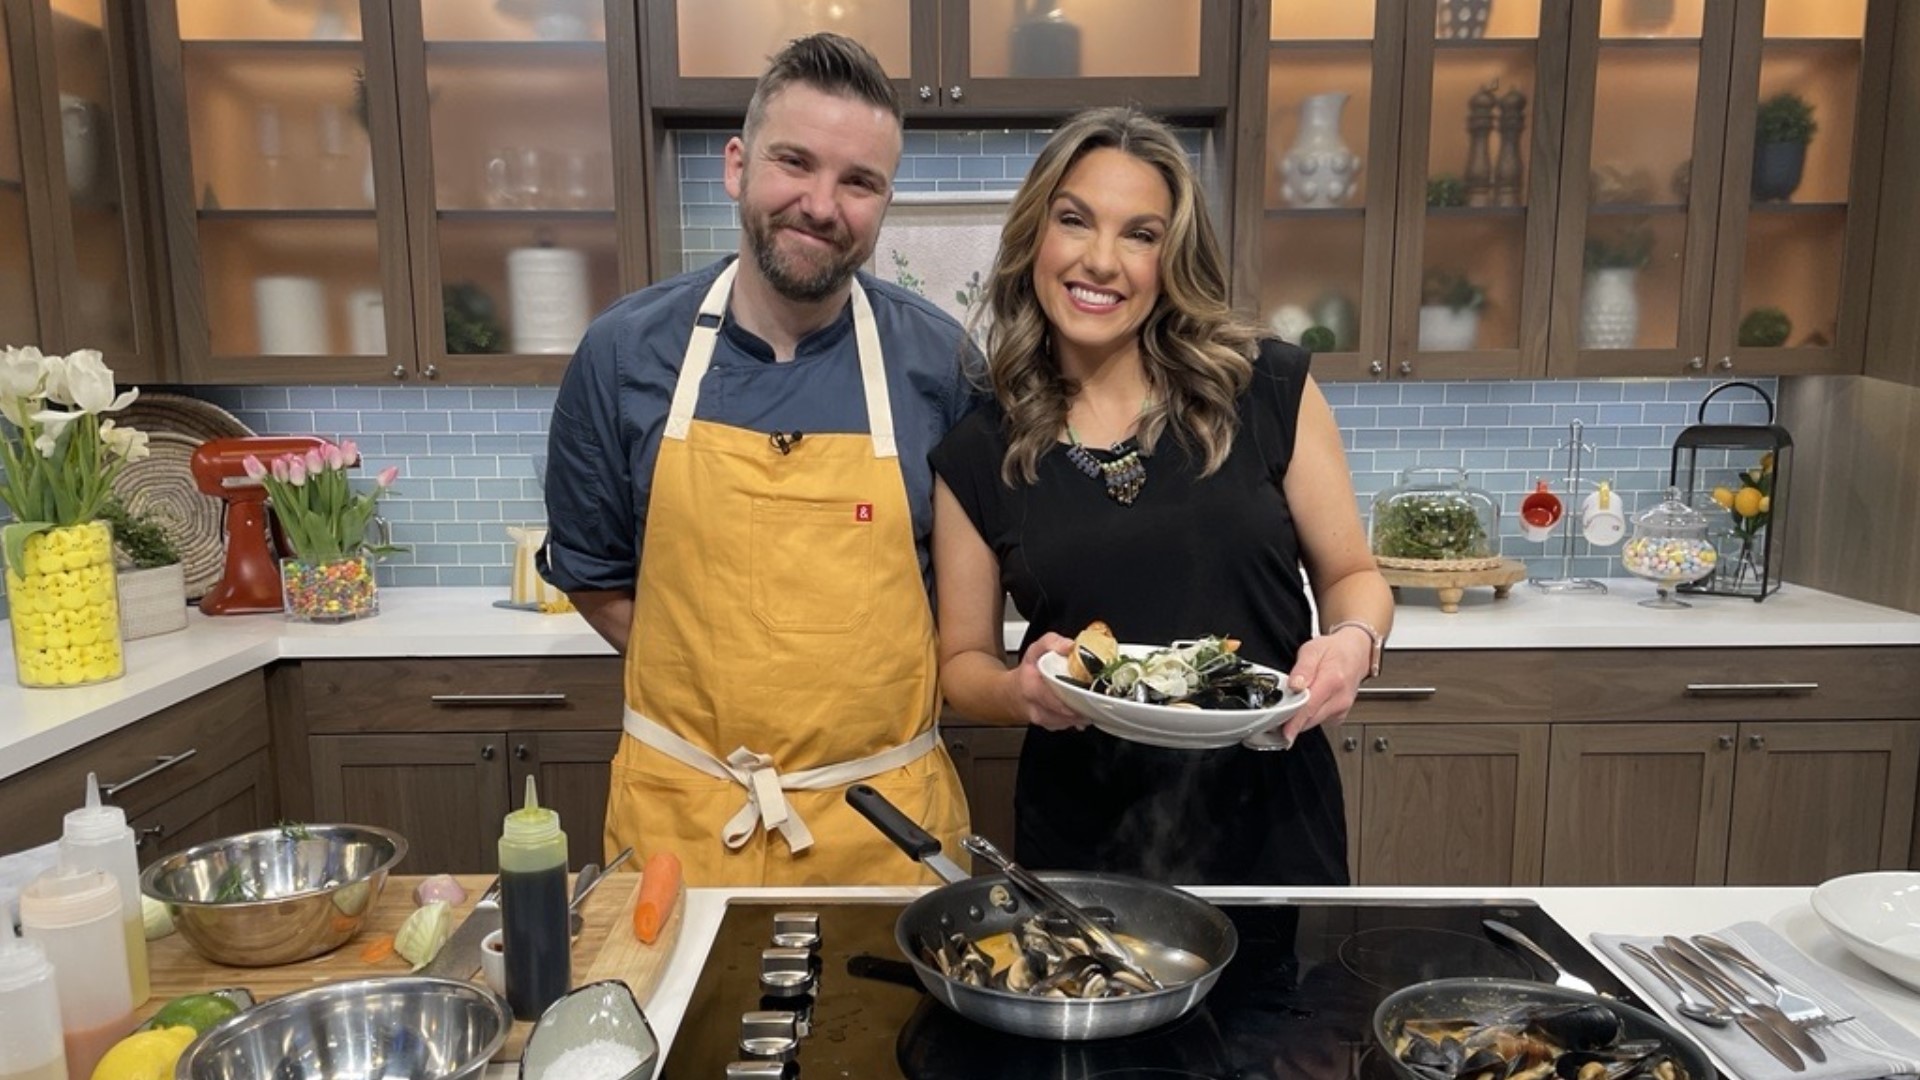 Arleana's, a French-inspired Caribbean restaurant from the owners of Island Soul, is opening in Kirkland April 8. Chef James Gibney joined us for a preview. #newday